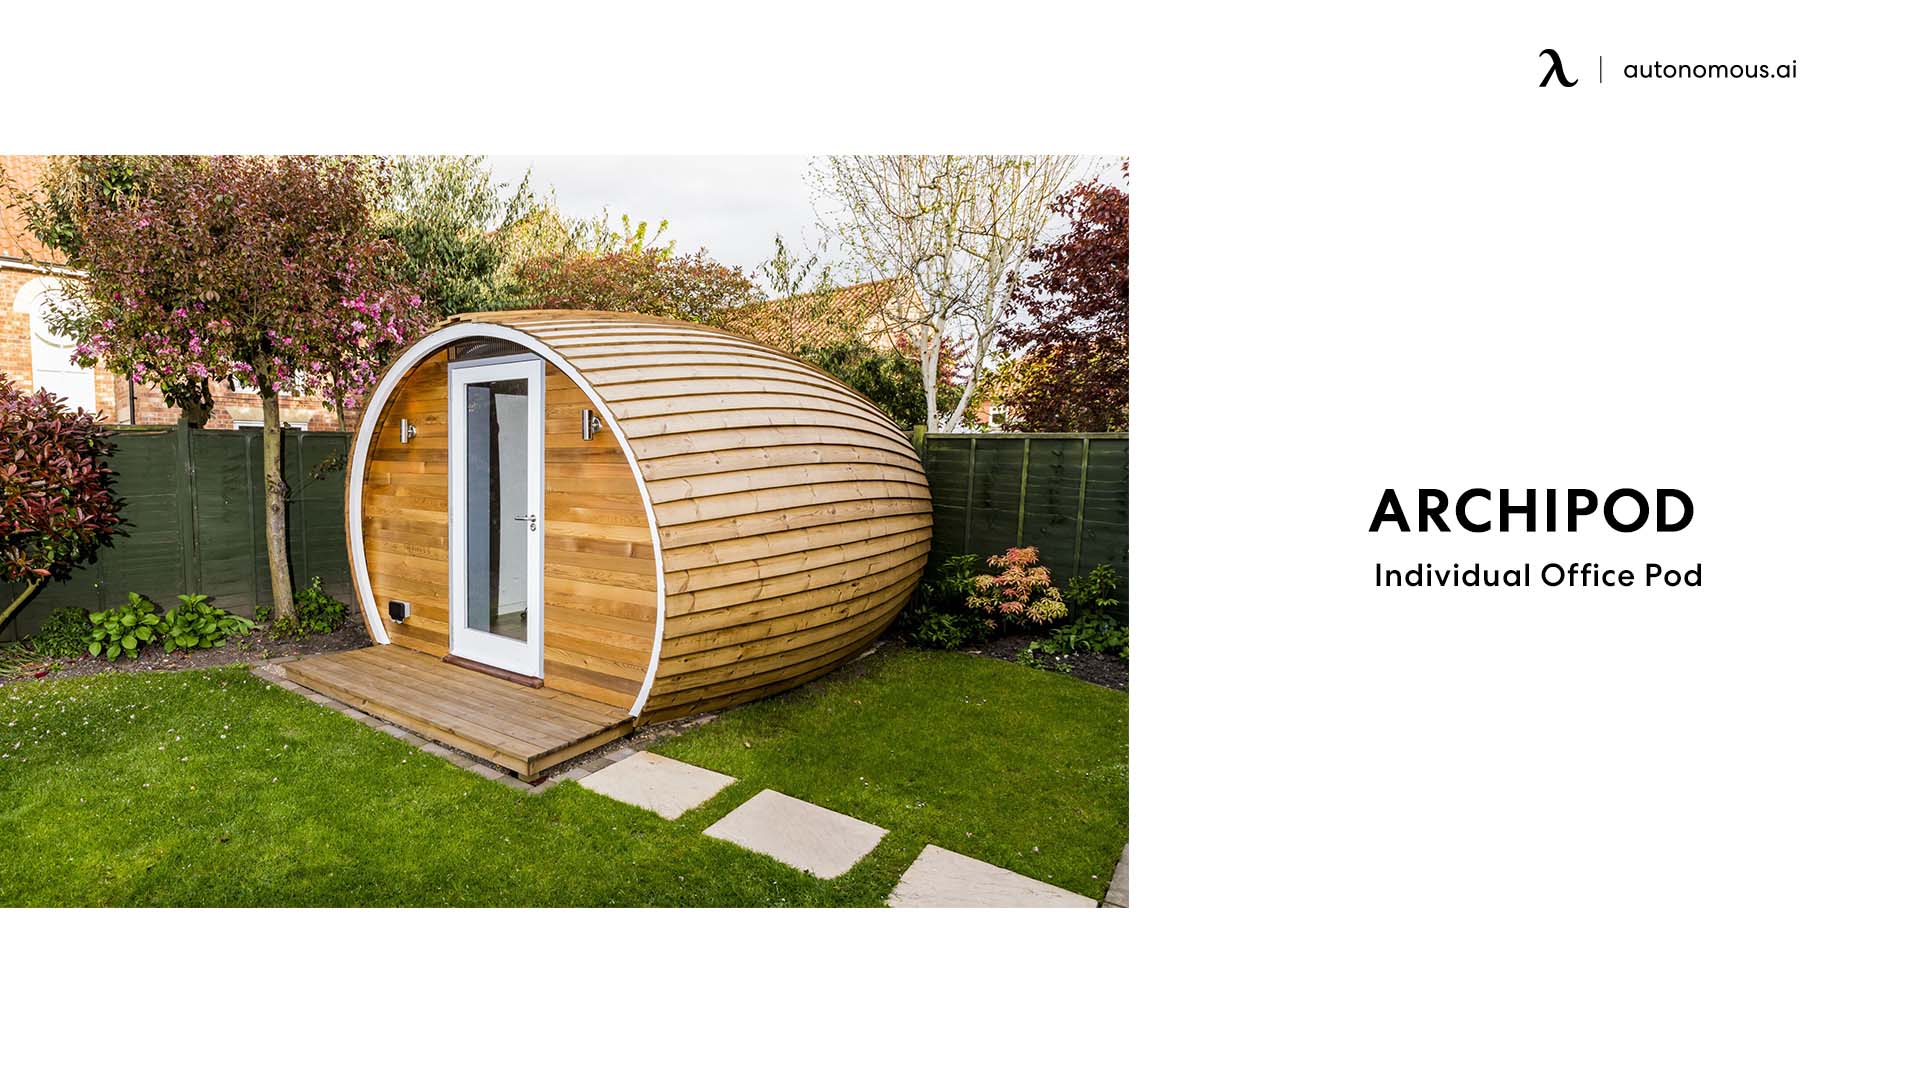 ArchiPod individual office pods